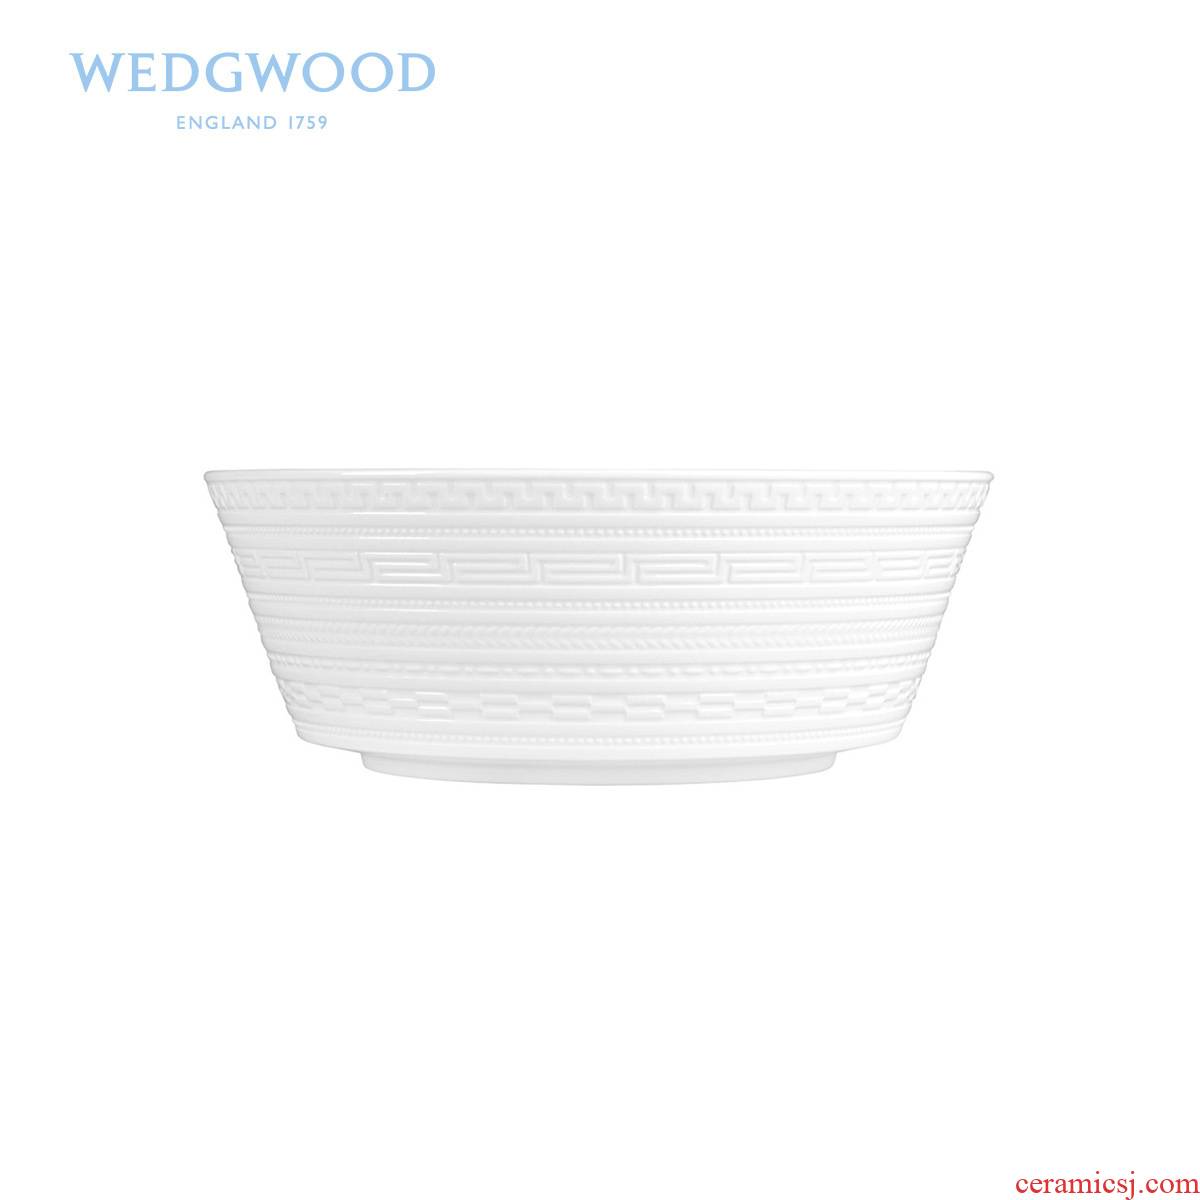 Wedgwood waterford Wedgwood Intaglio anaglyph 20 cm ipads porcelain large soup bowl/fruit dou high - grade ipads China tableware